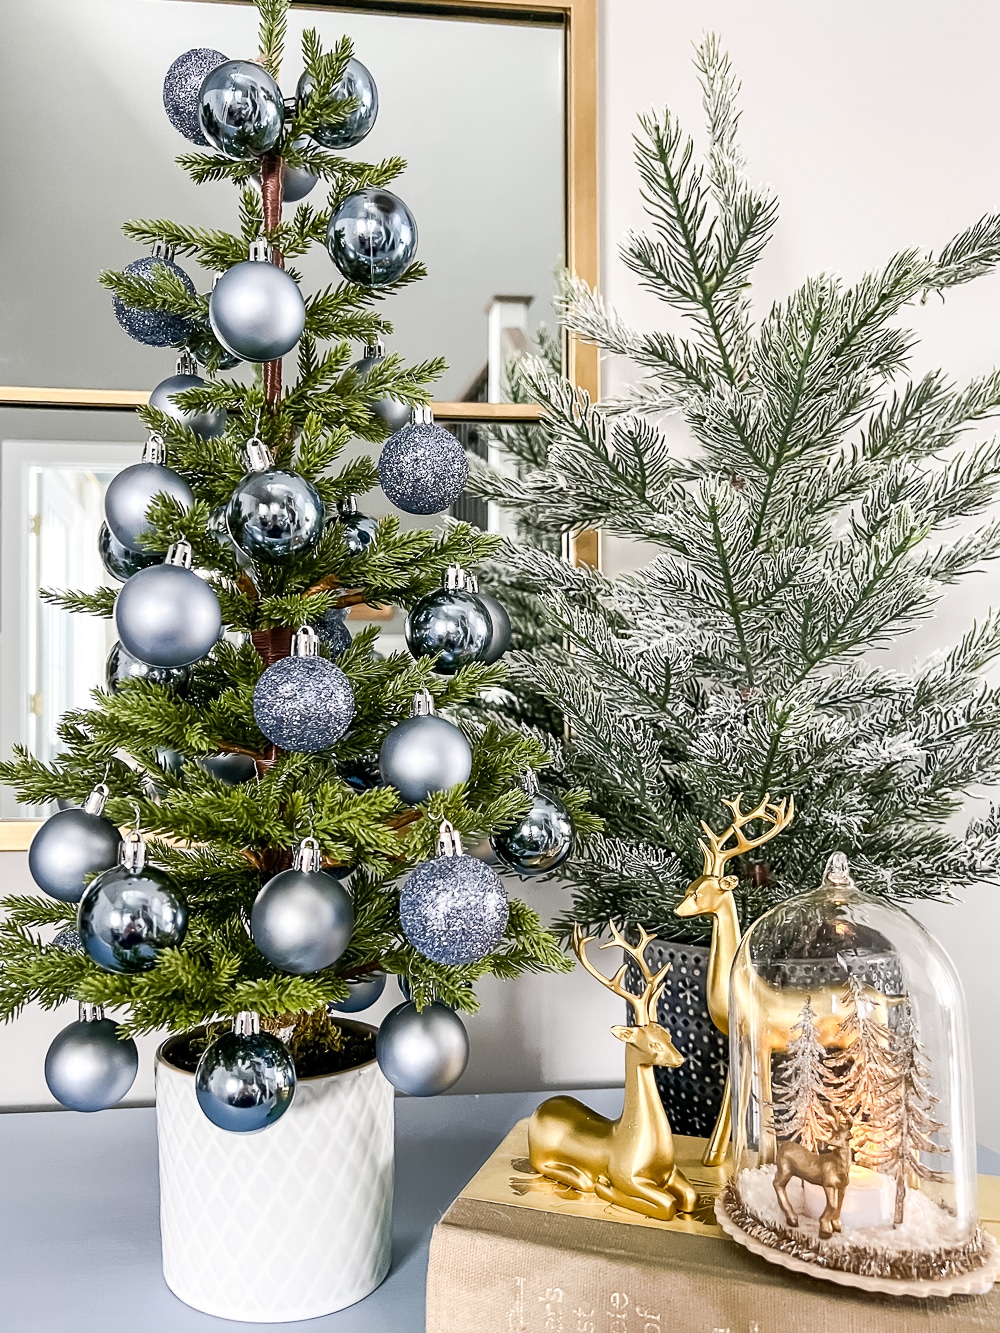 All blue ornaments decorate a mini tree on a blue console table in the entryway.